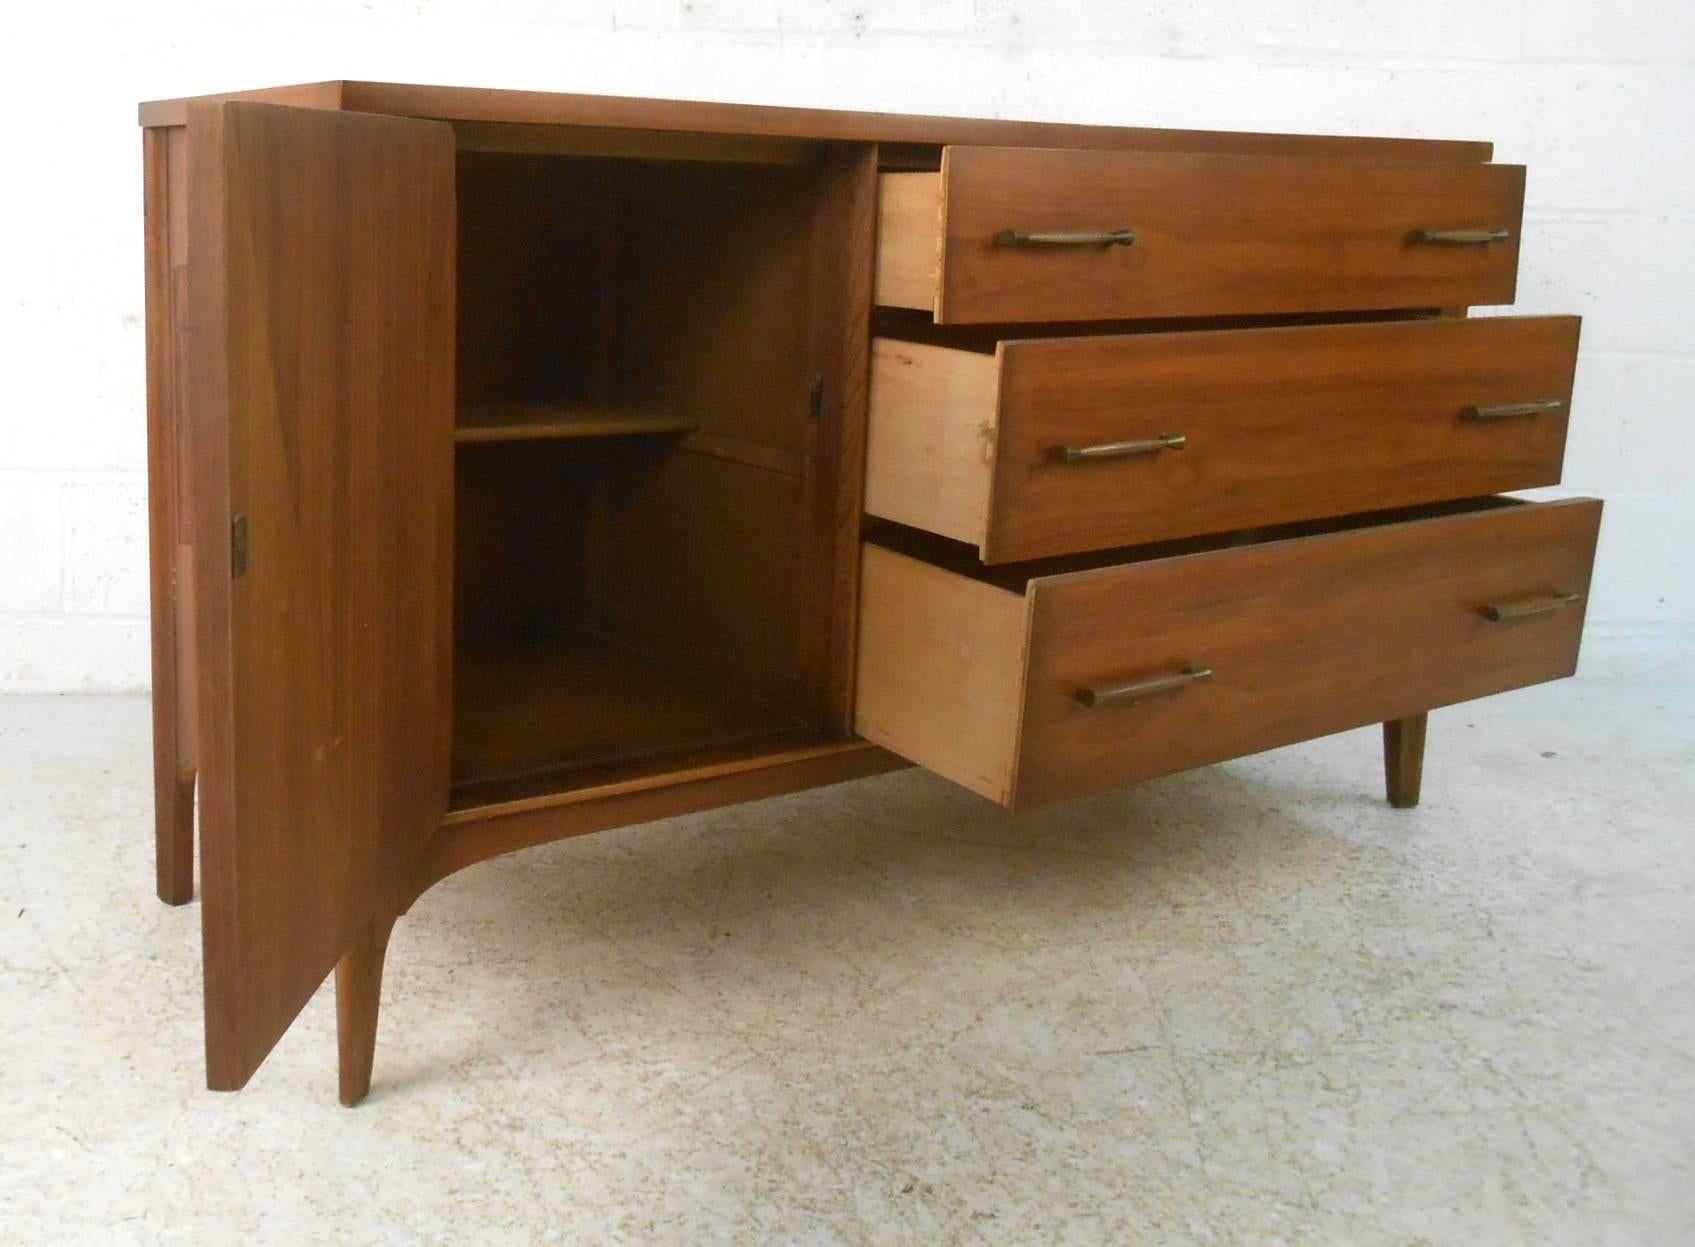 Late 20th Century Mid-Century Modern Broyhill Style Credenza